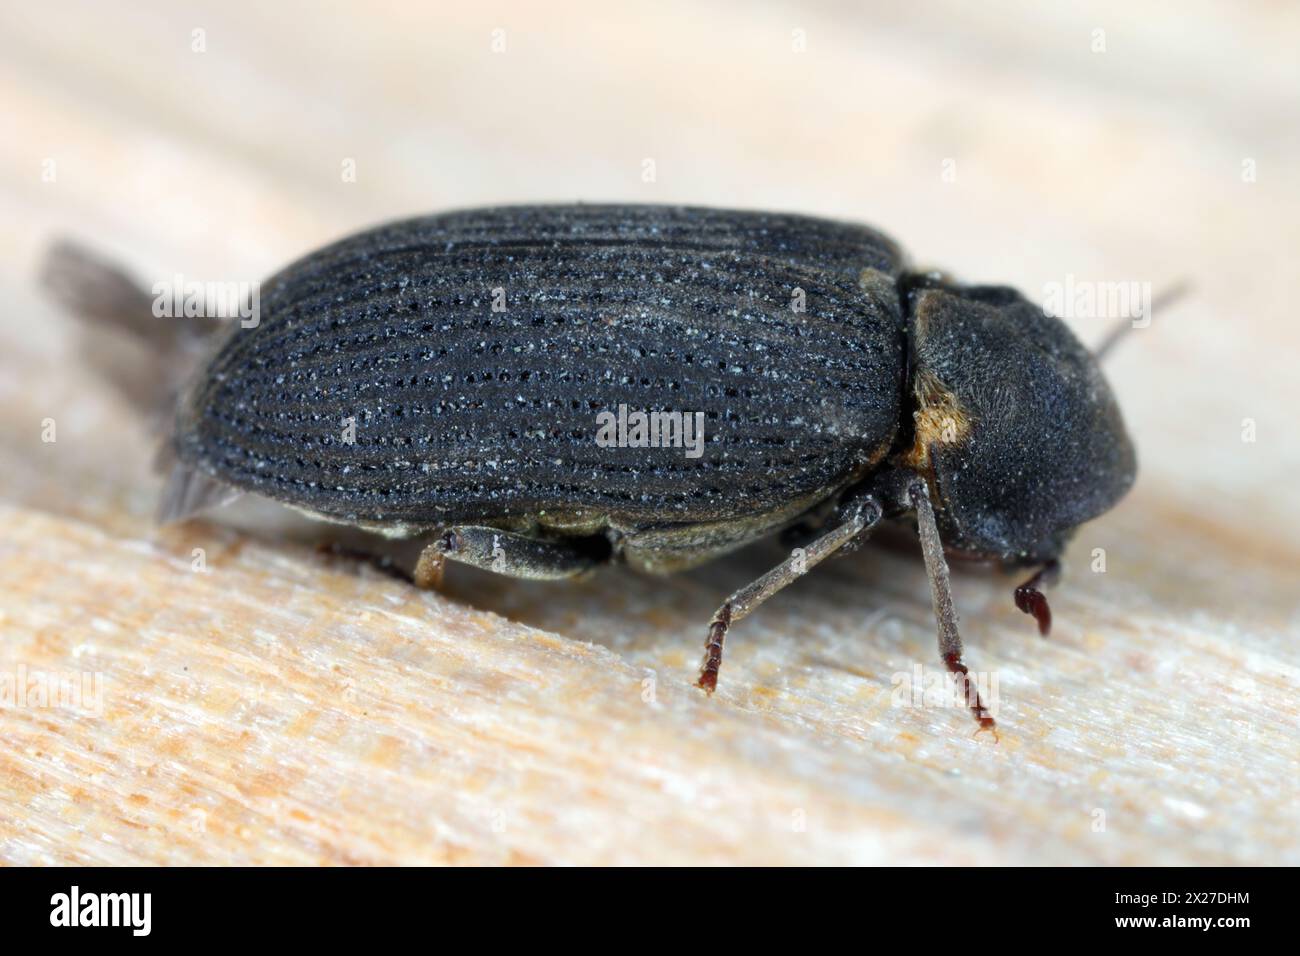 Hadrobregmus pertinax is a species of woodboring beetle from family Anobiidae. Beetle on wood. Stock Photo